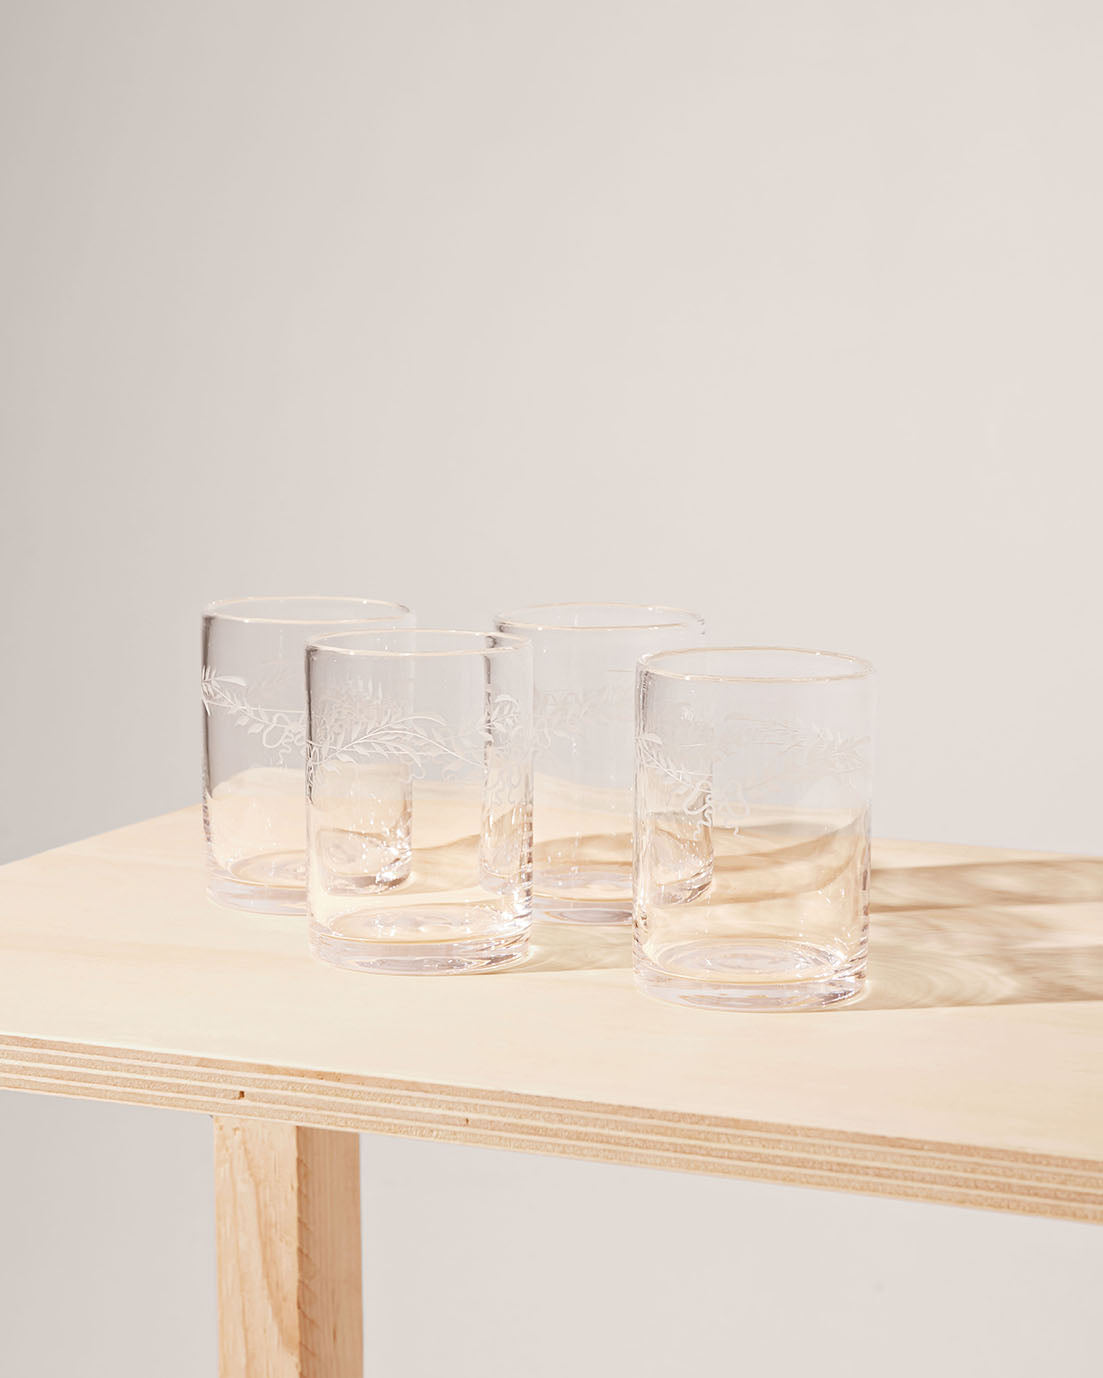 Akua Objects Glassware. Mouth blown and handmade Bohemian Glassware. Made in Bohemia. Add poetry to your table with Barbro water glasses. These contemporary interpreted glasses have been mouth blown with patterns added afterwards, patiently engraved by a master’s hand.